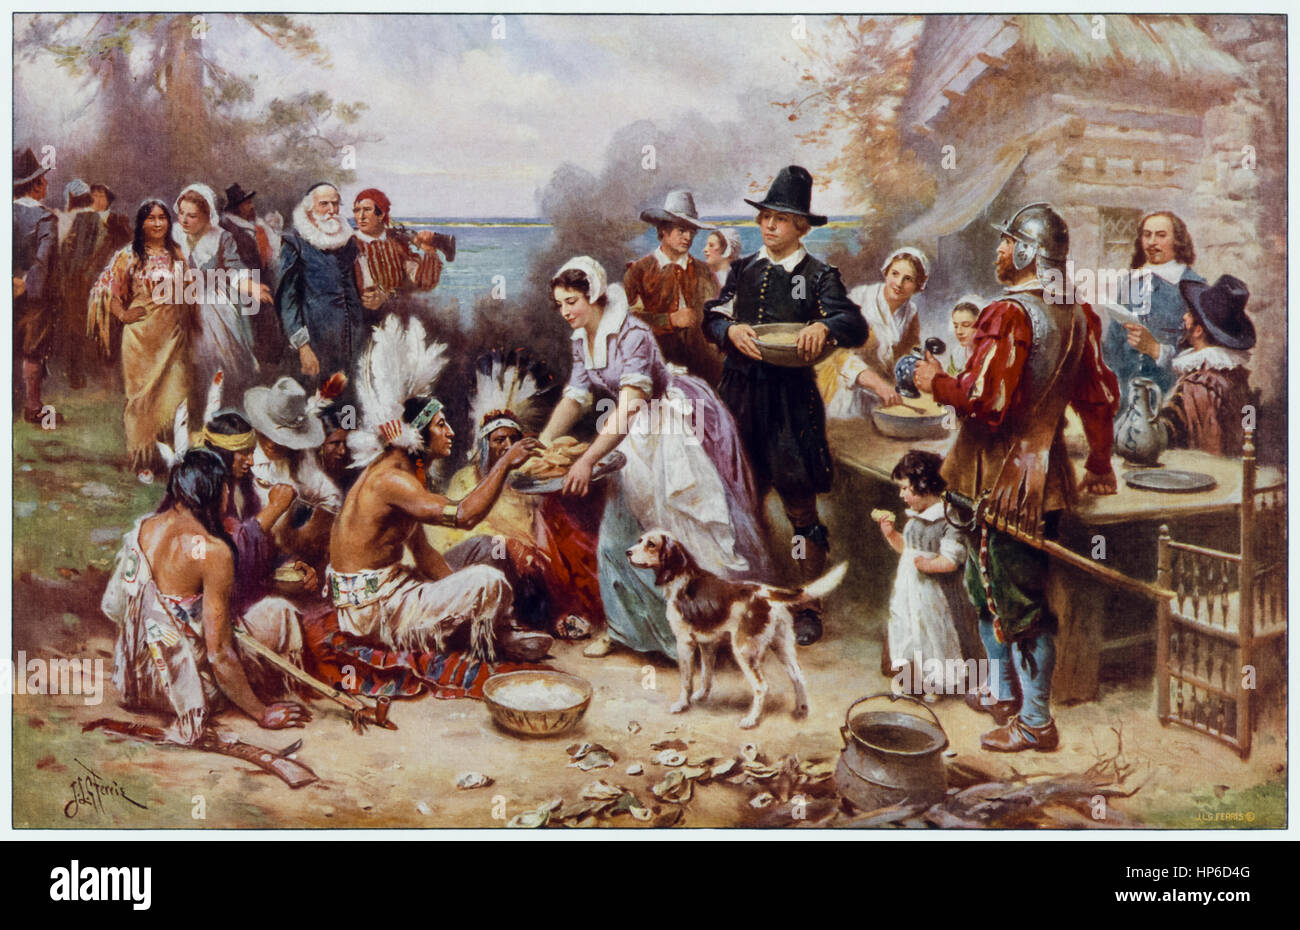 “The First Thanksgiving 1621” by Jean Leon Gerome Ferris (1863-1930) American artist who painted many scenes from American history; in this idealized scene Native Americans and Pilgrims share a meal. Stock Photo